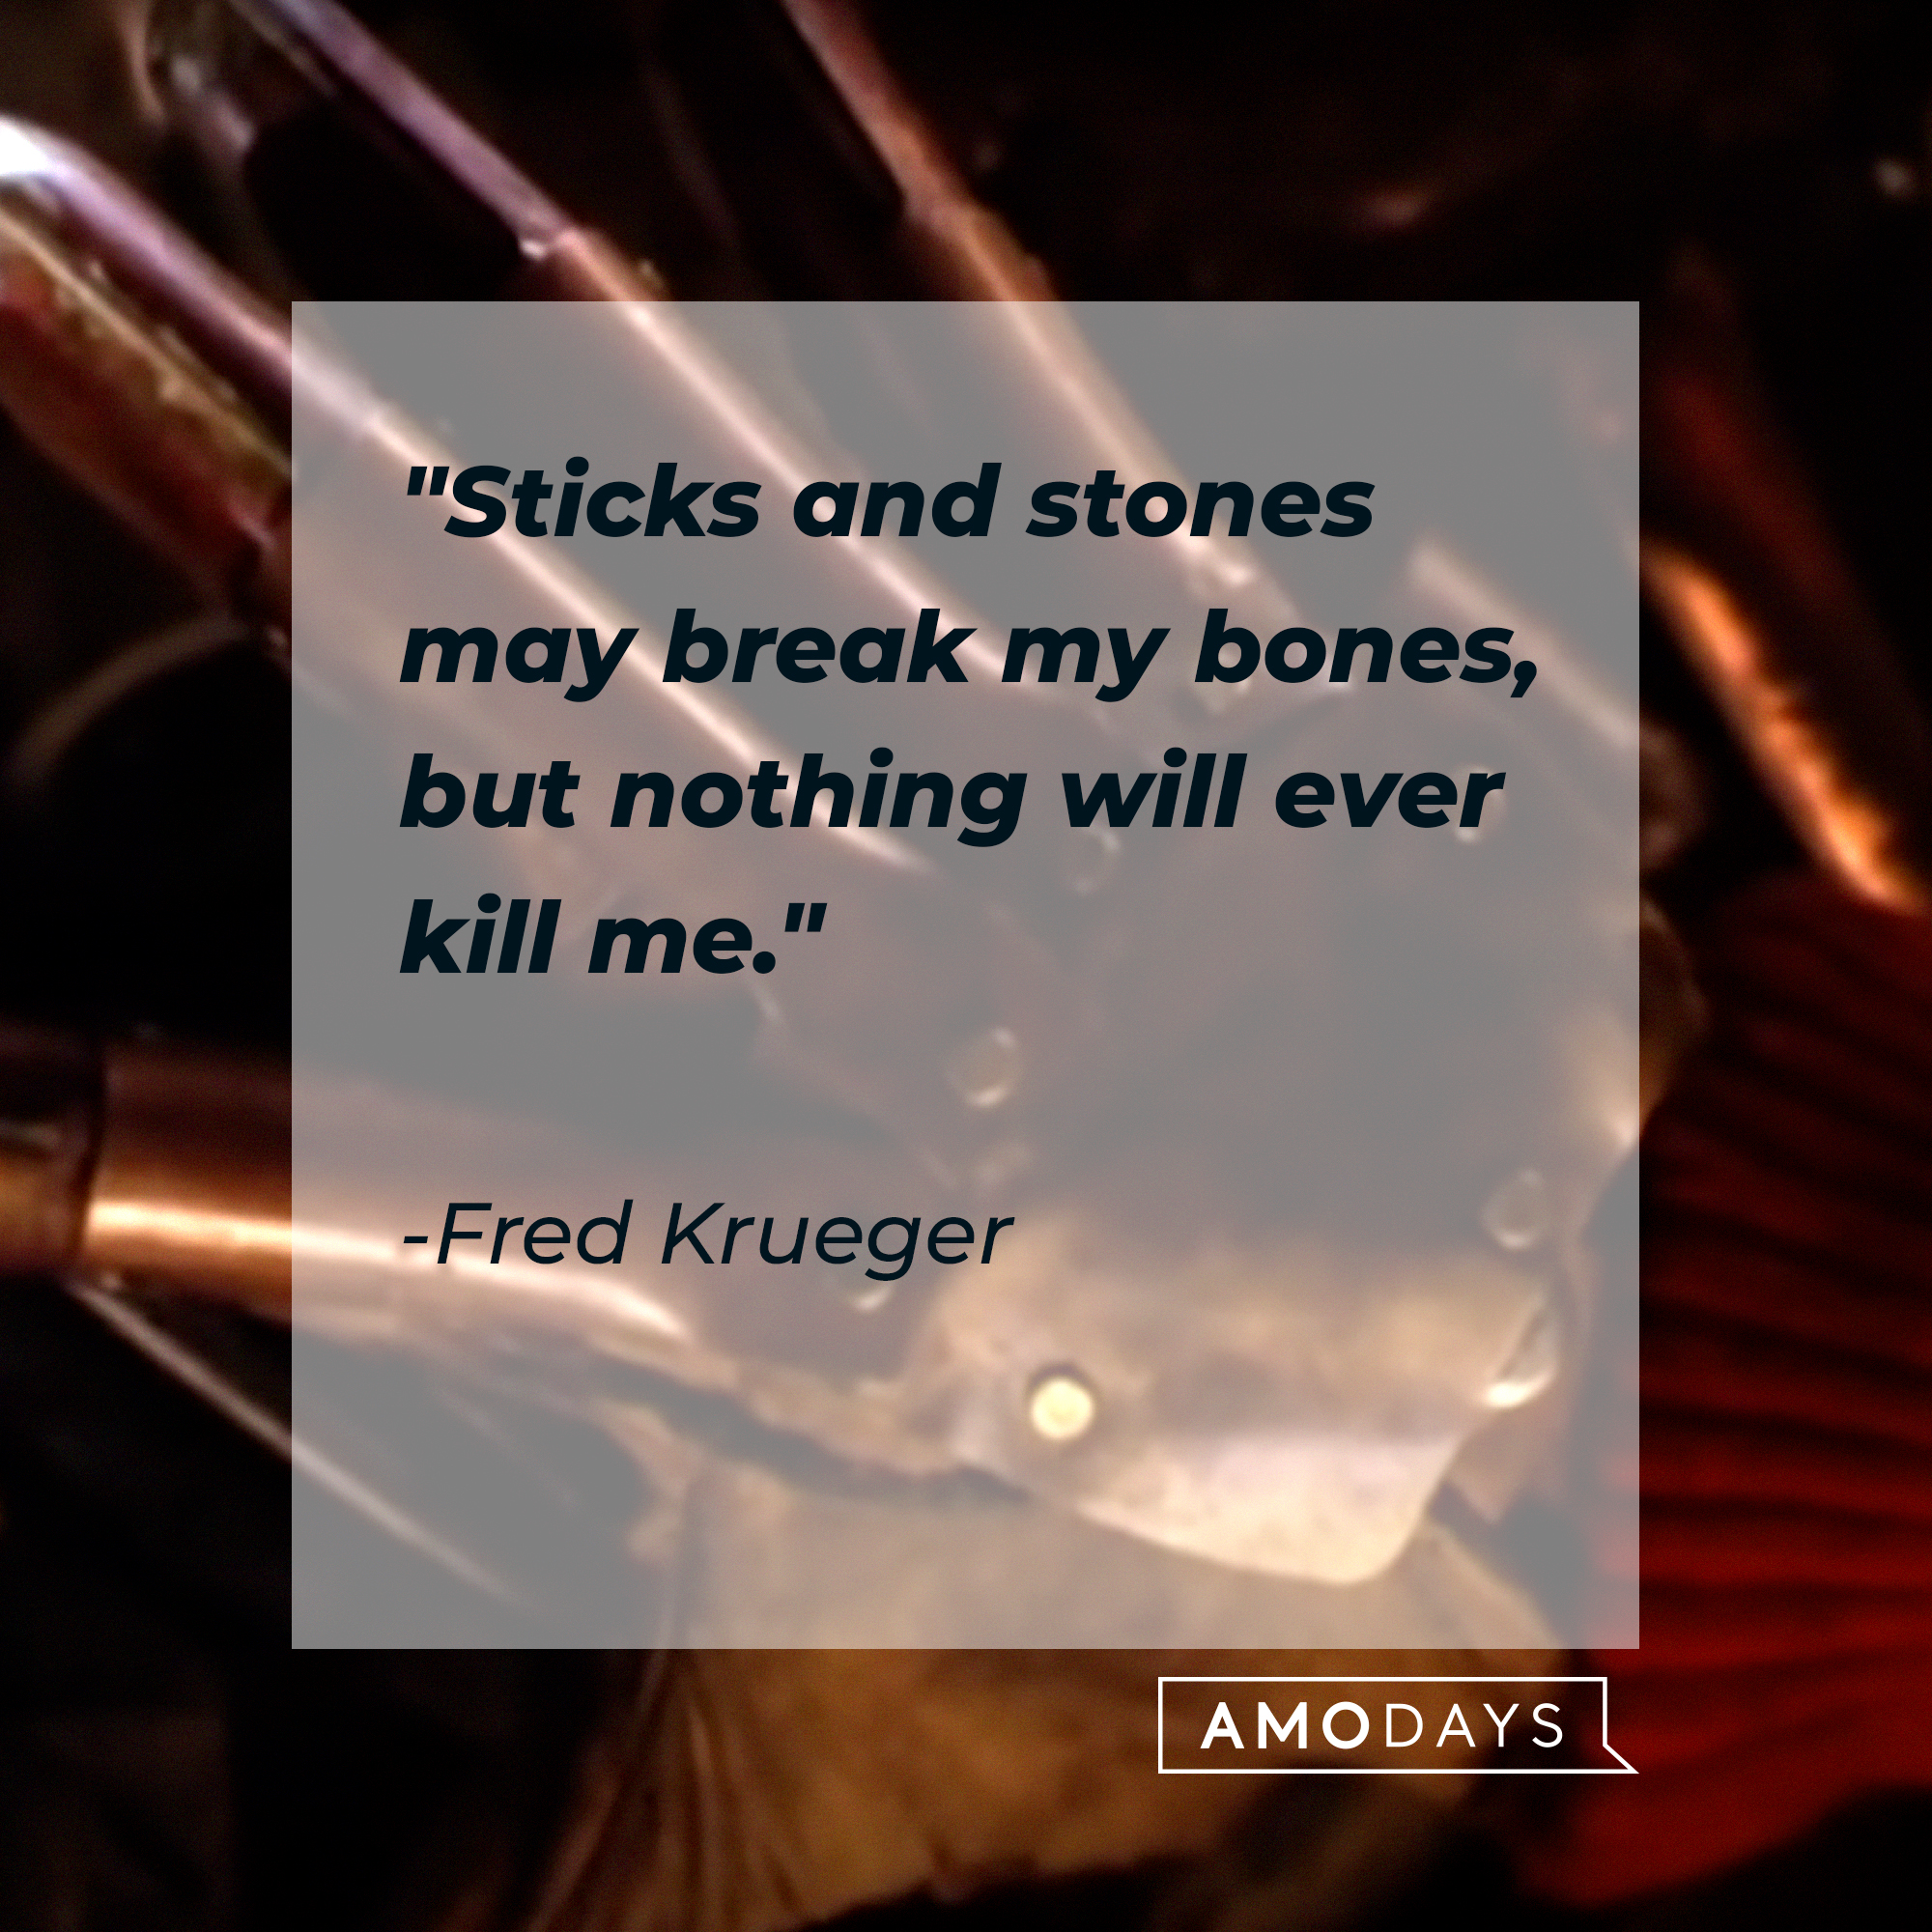 Freddy Krueger's quote: "Sticks and stones may break my bones, but nothing will ever kill me." | Source: Facebook/ANightmareonElmStreet